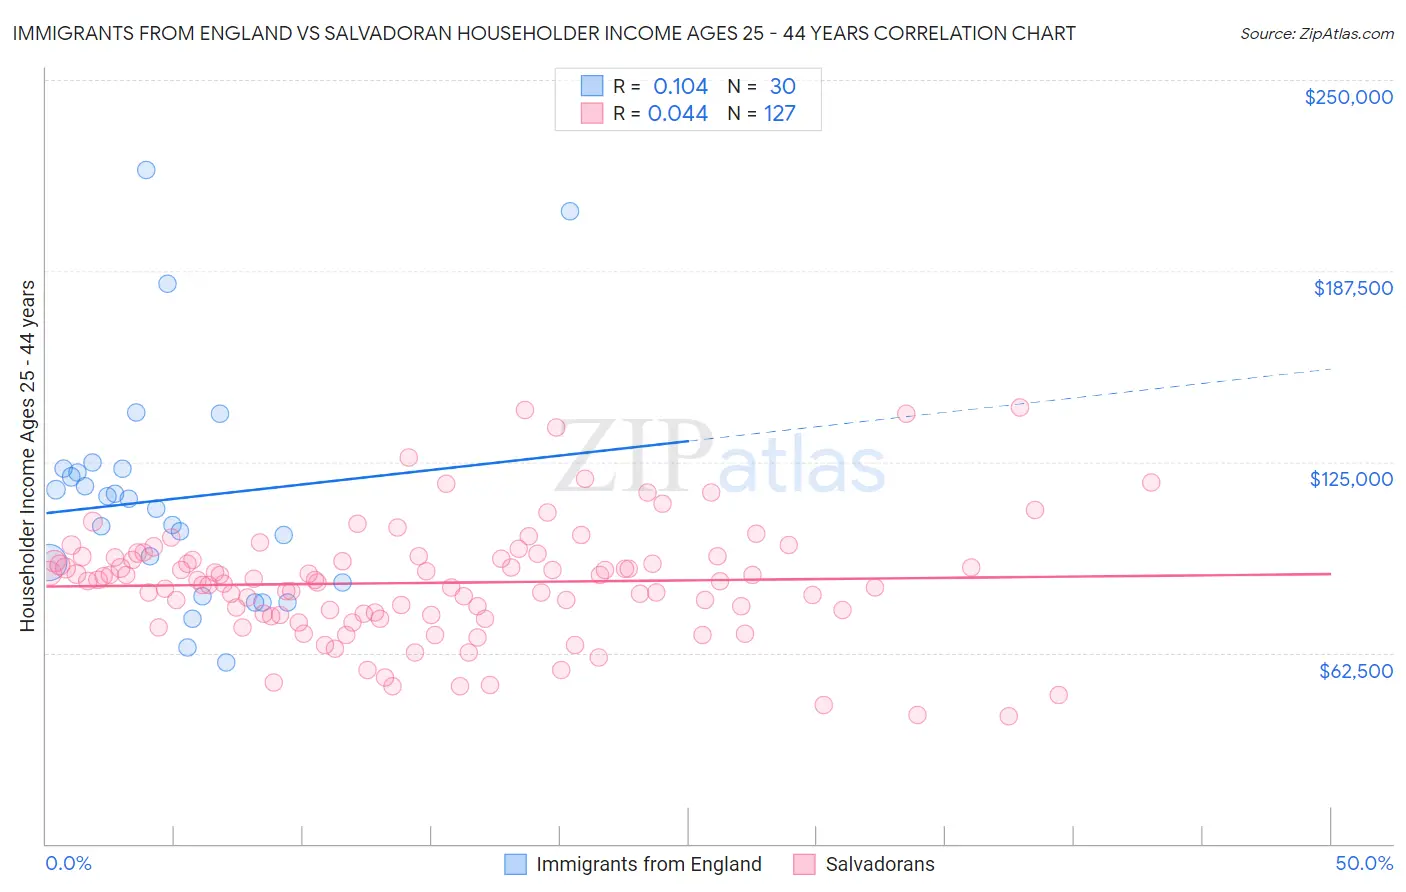 Immigrants from England vs Salvadoran Householder Income Ages 25 - 44 years